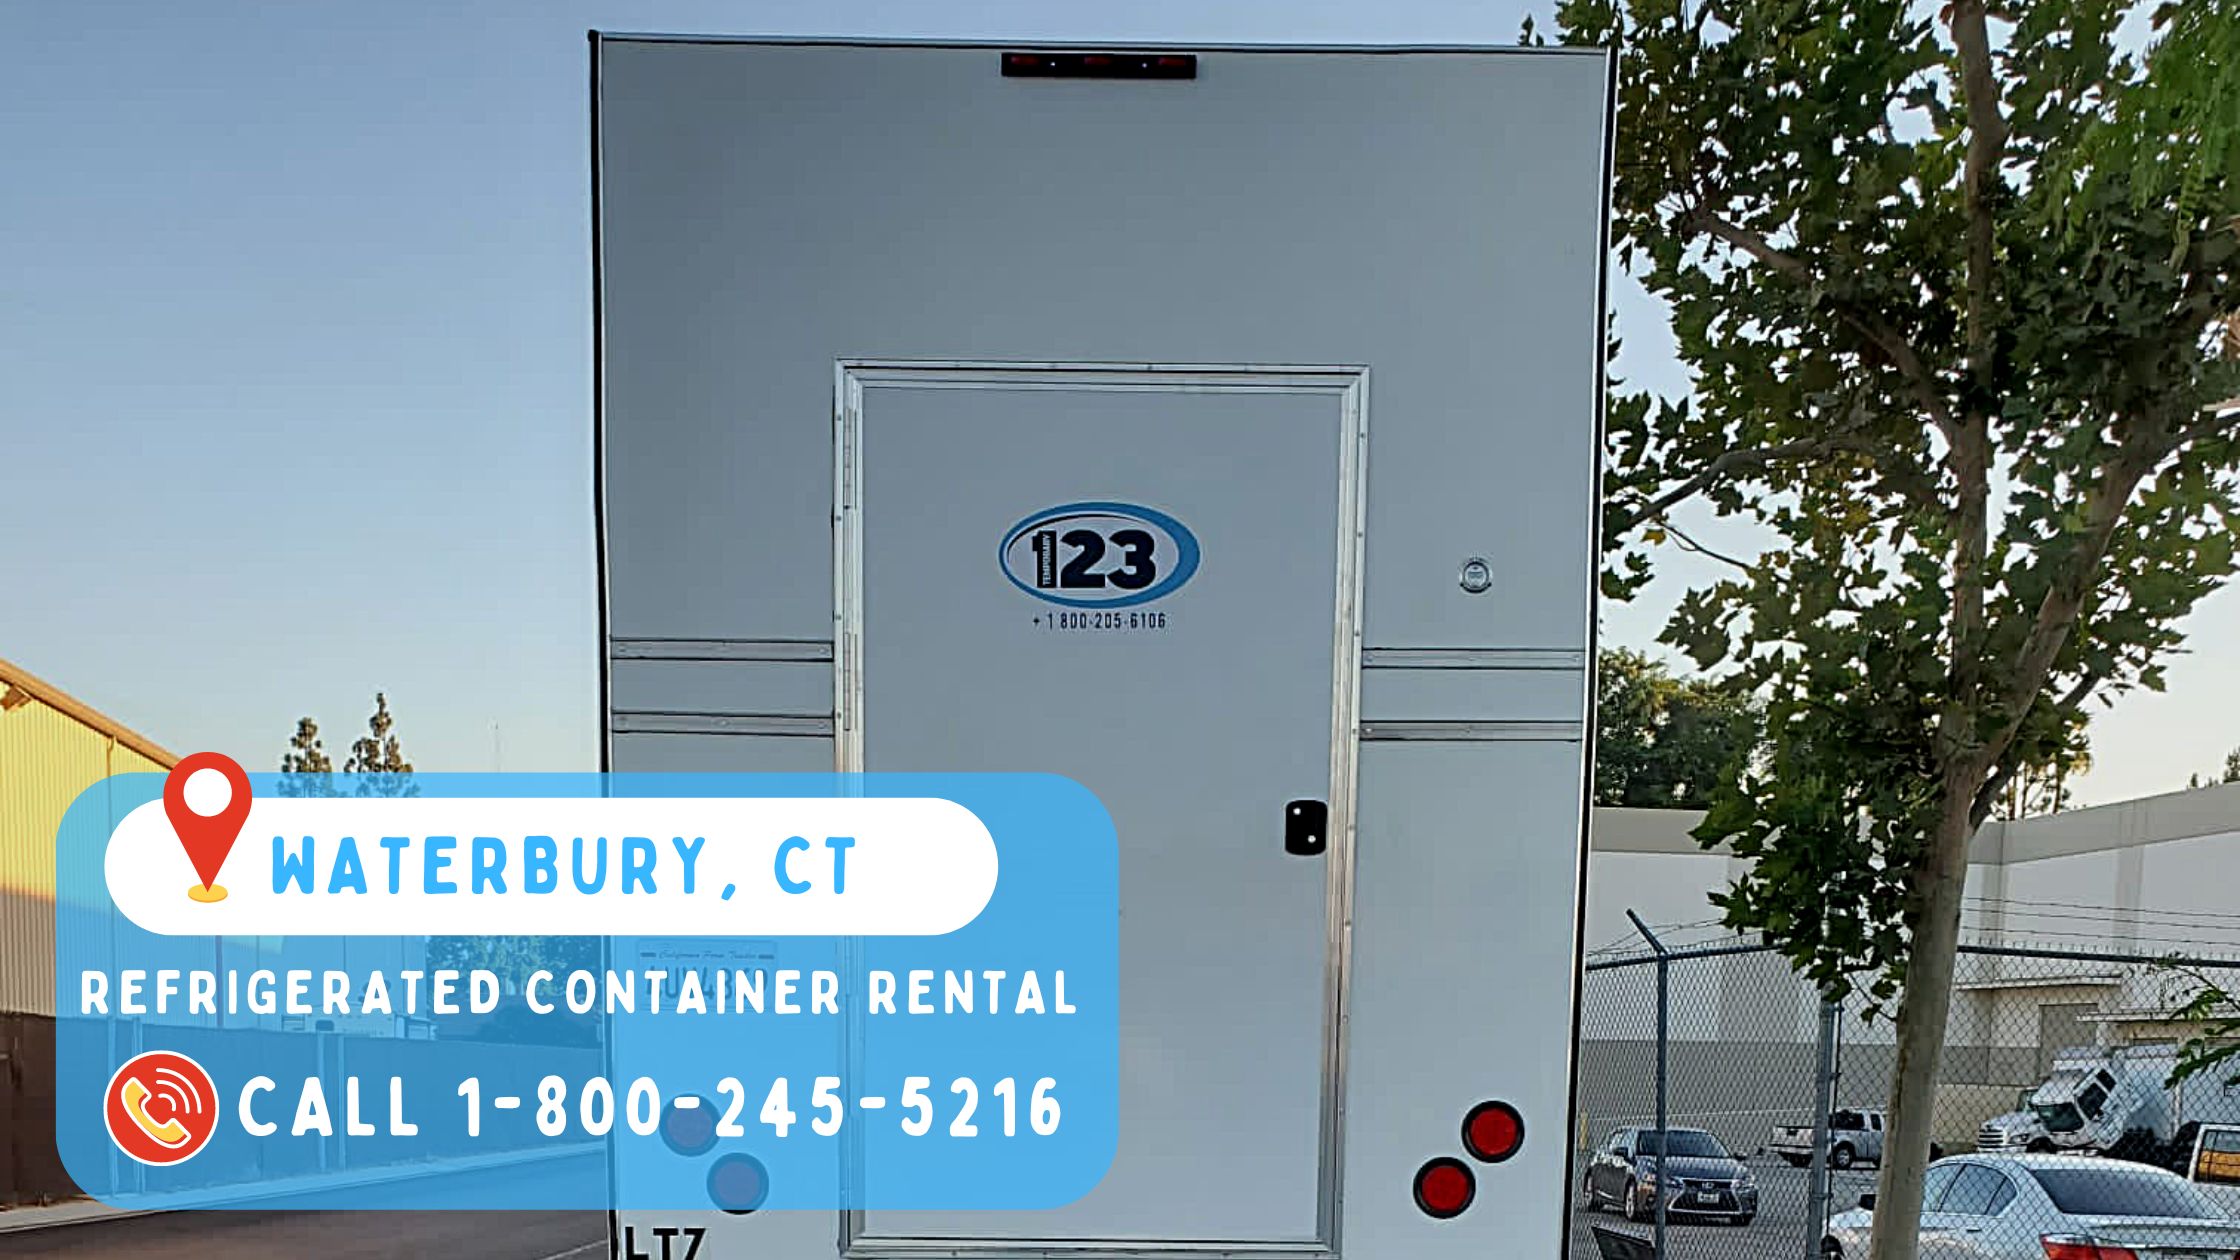 Refrigerated Container Rental in Waterbury